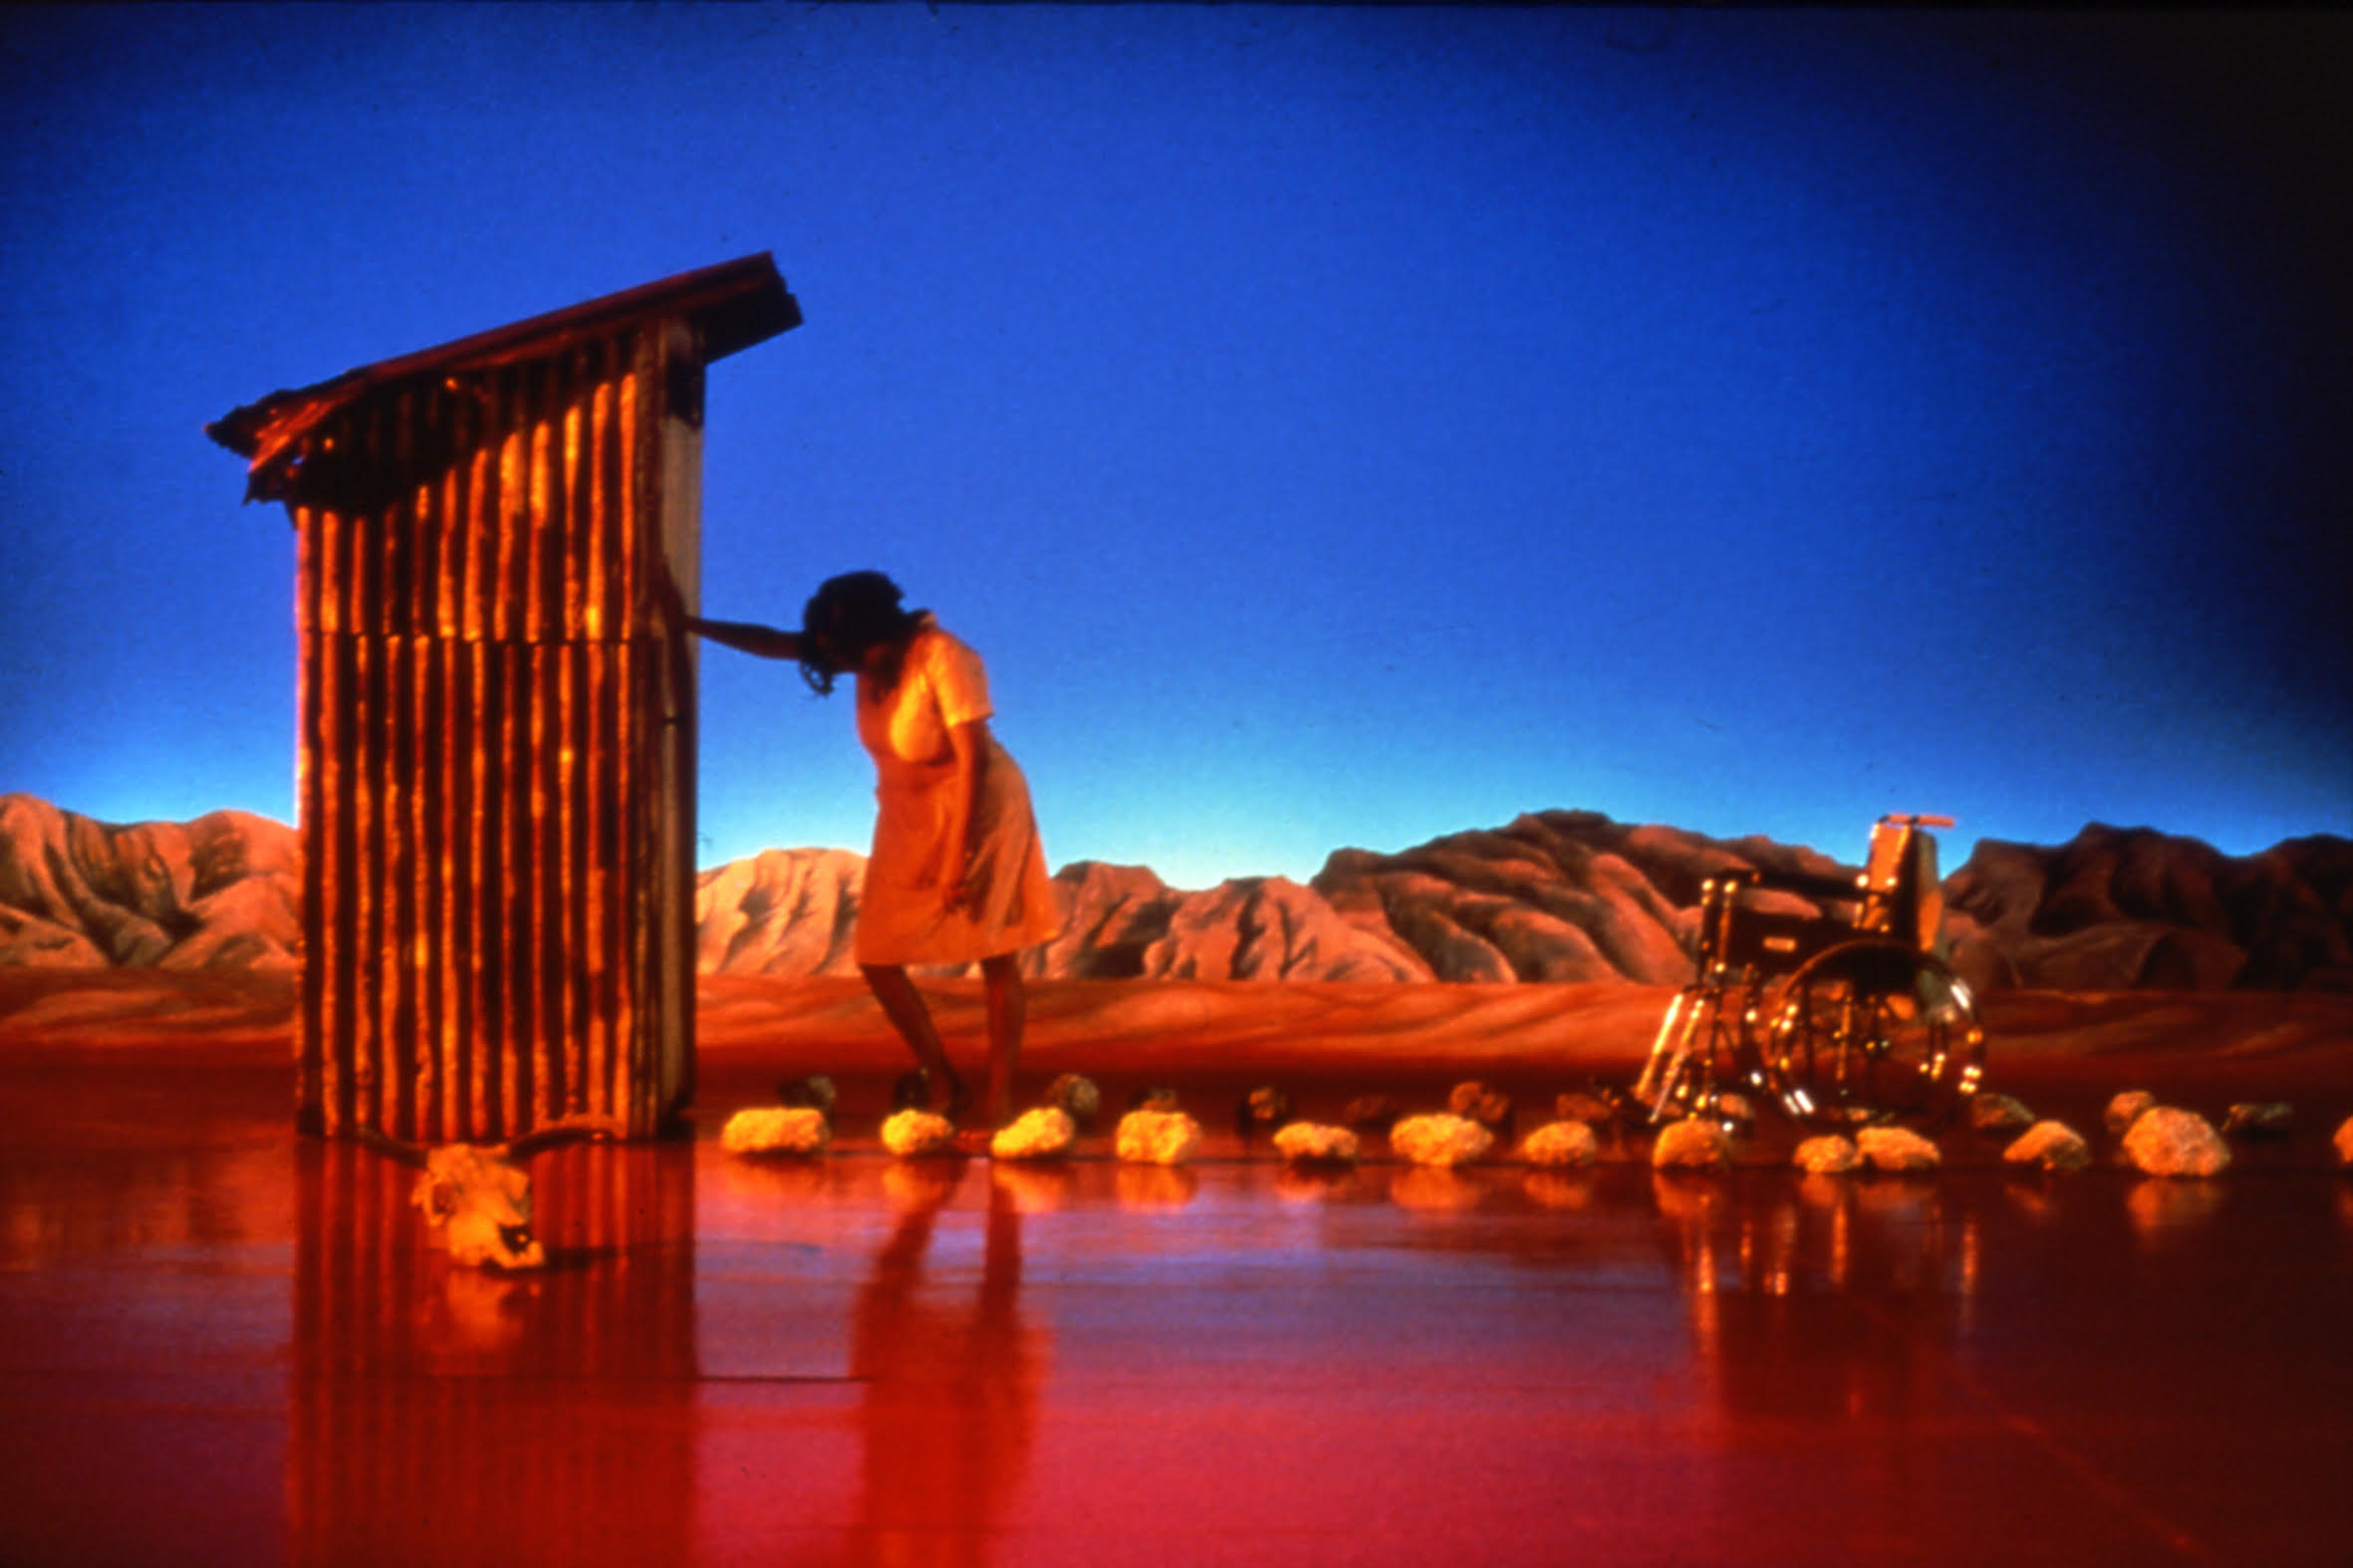 Aboriginal woman on a stage with the outback a the backdrop. She is leaning against an outhouse.